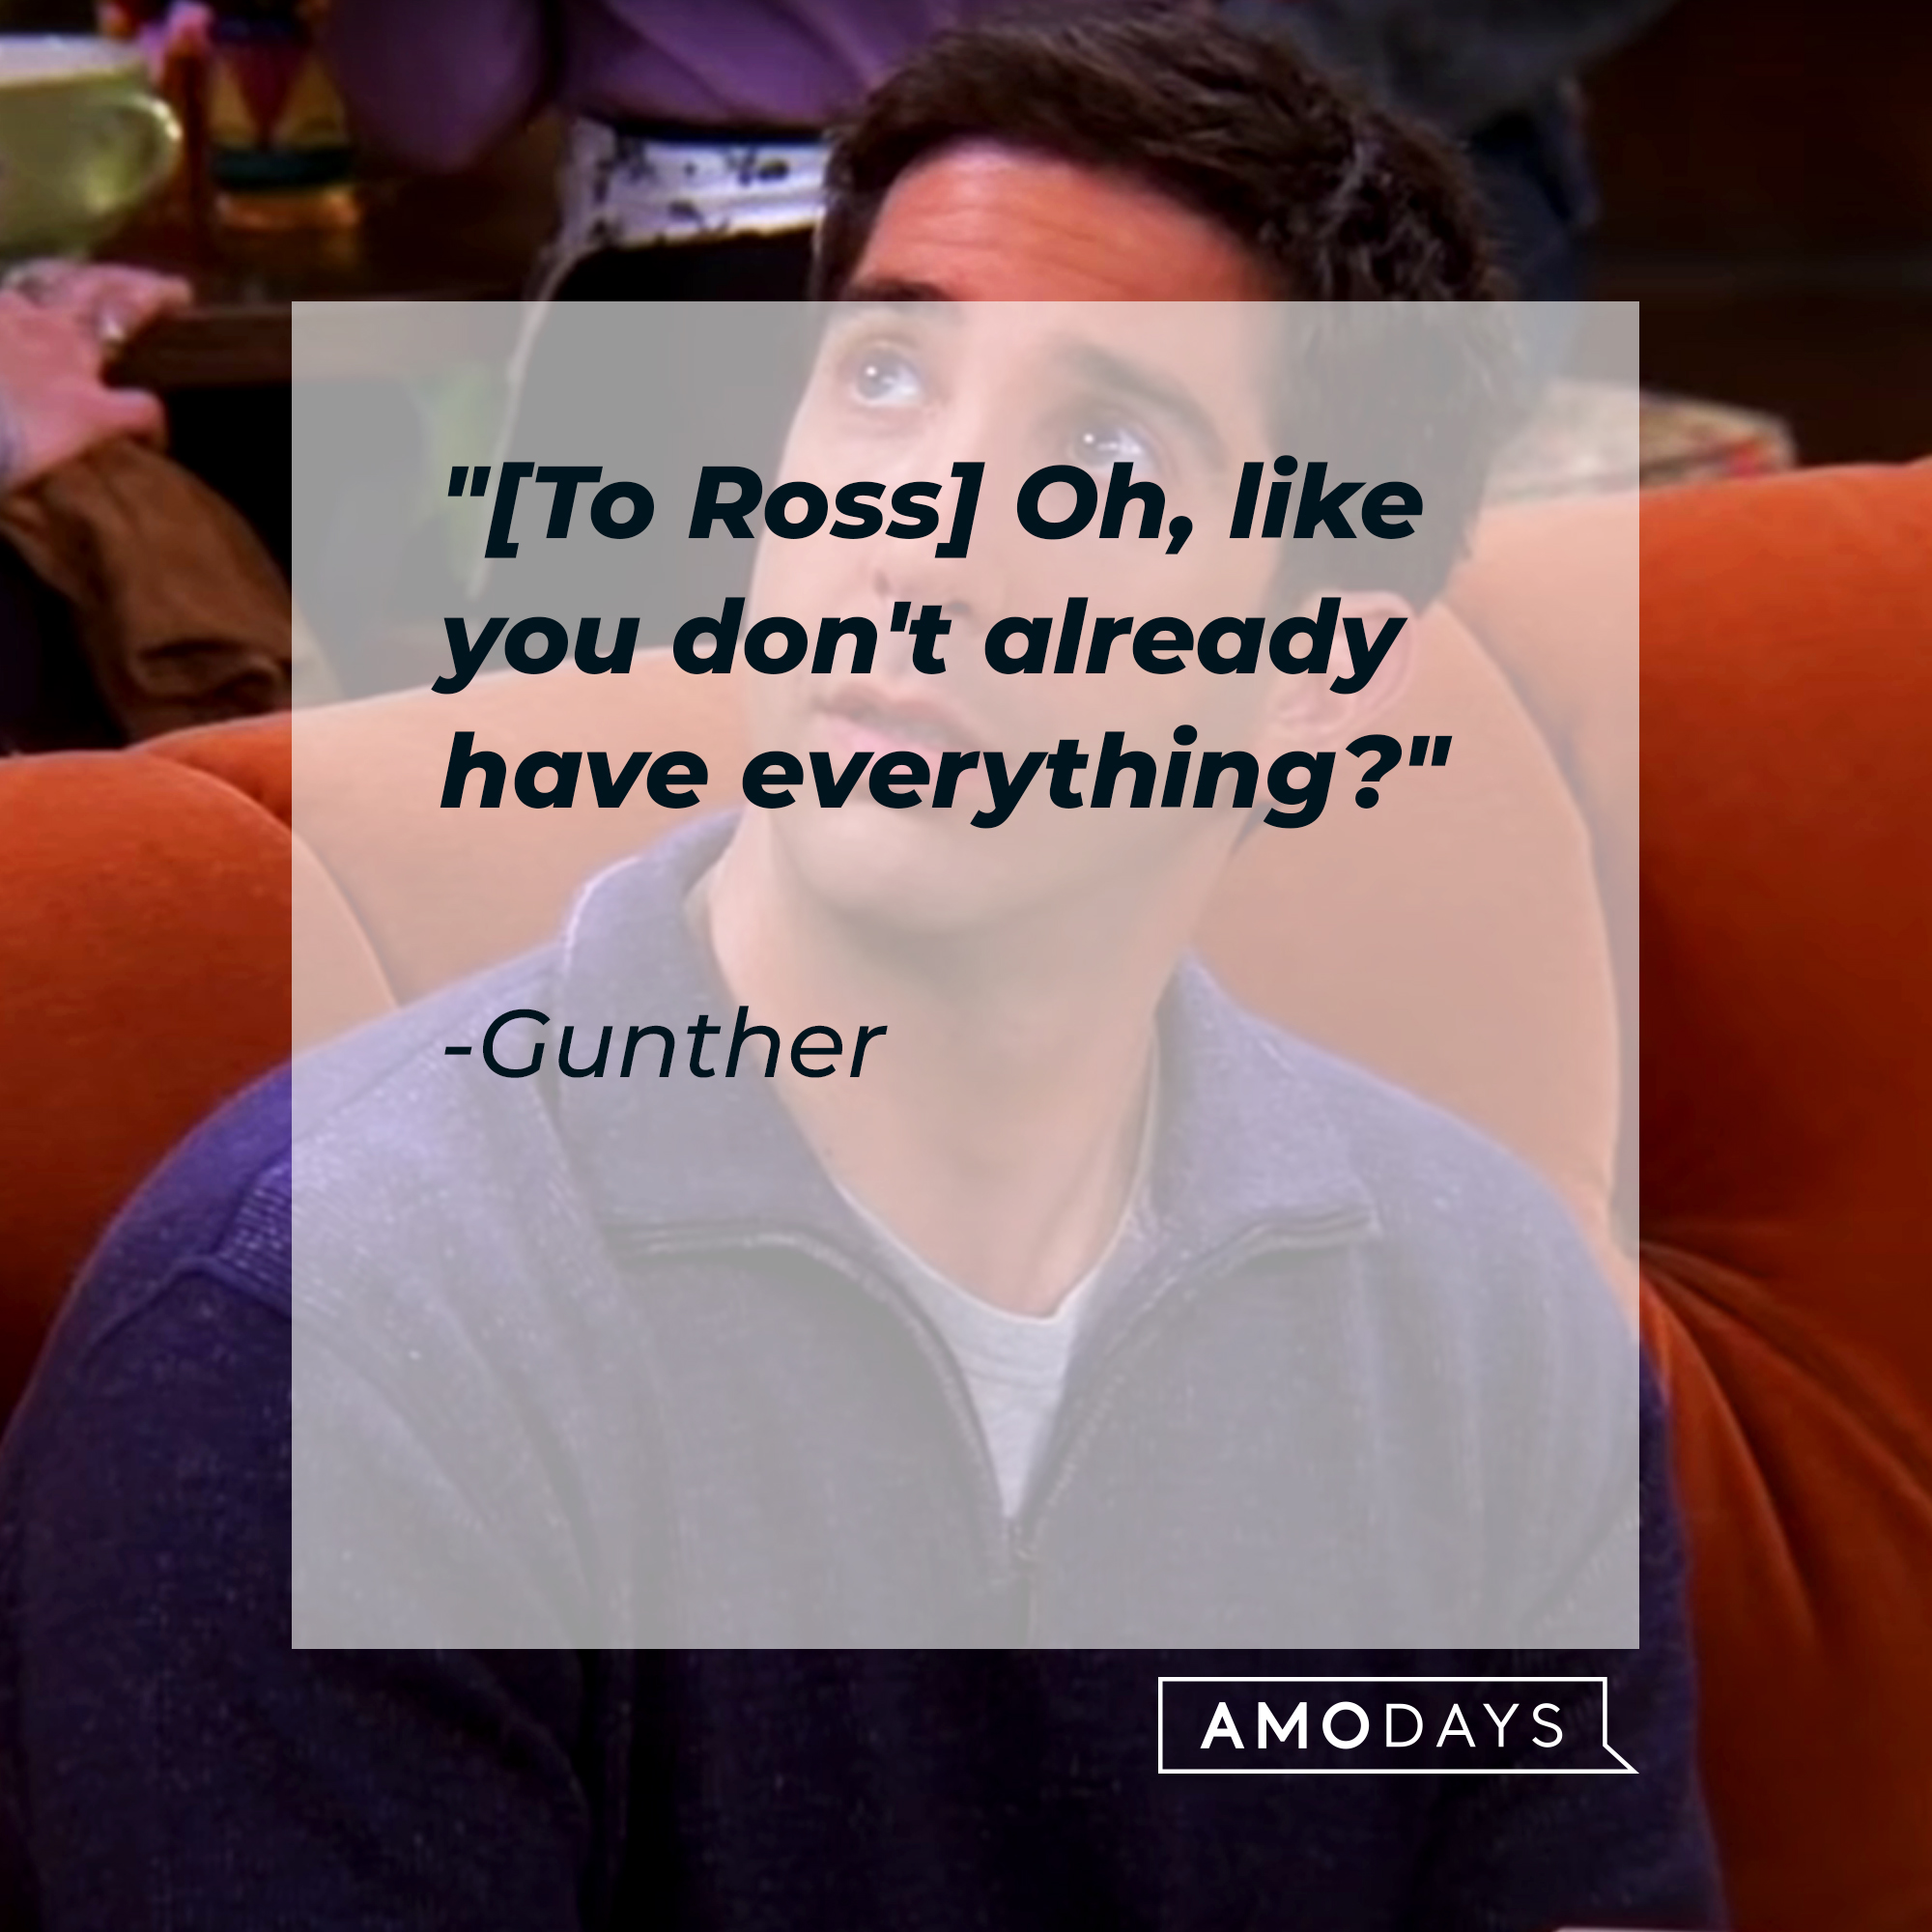 An image of Ross with Gunther’s quote: "[To Ross] Oh, like you don't already have everything?" | Source: Youtube.com/Friends